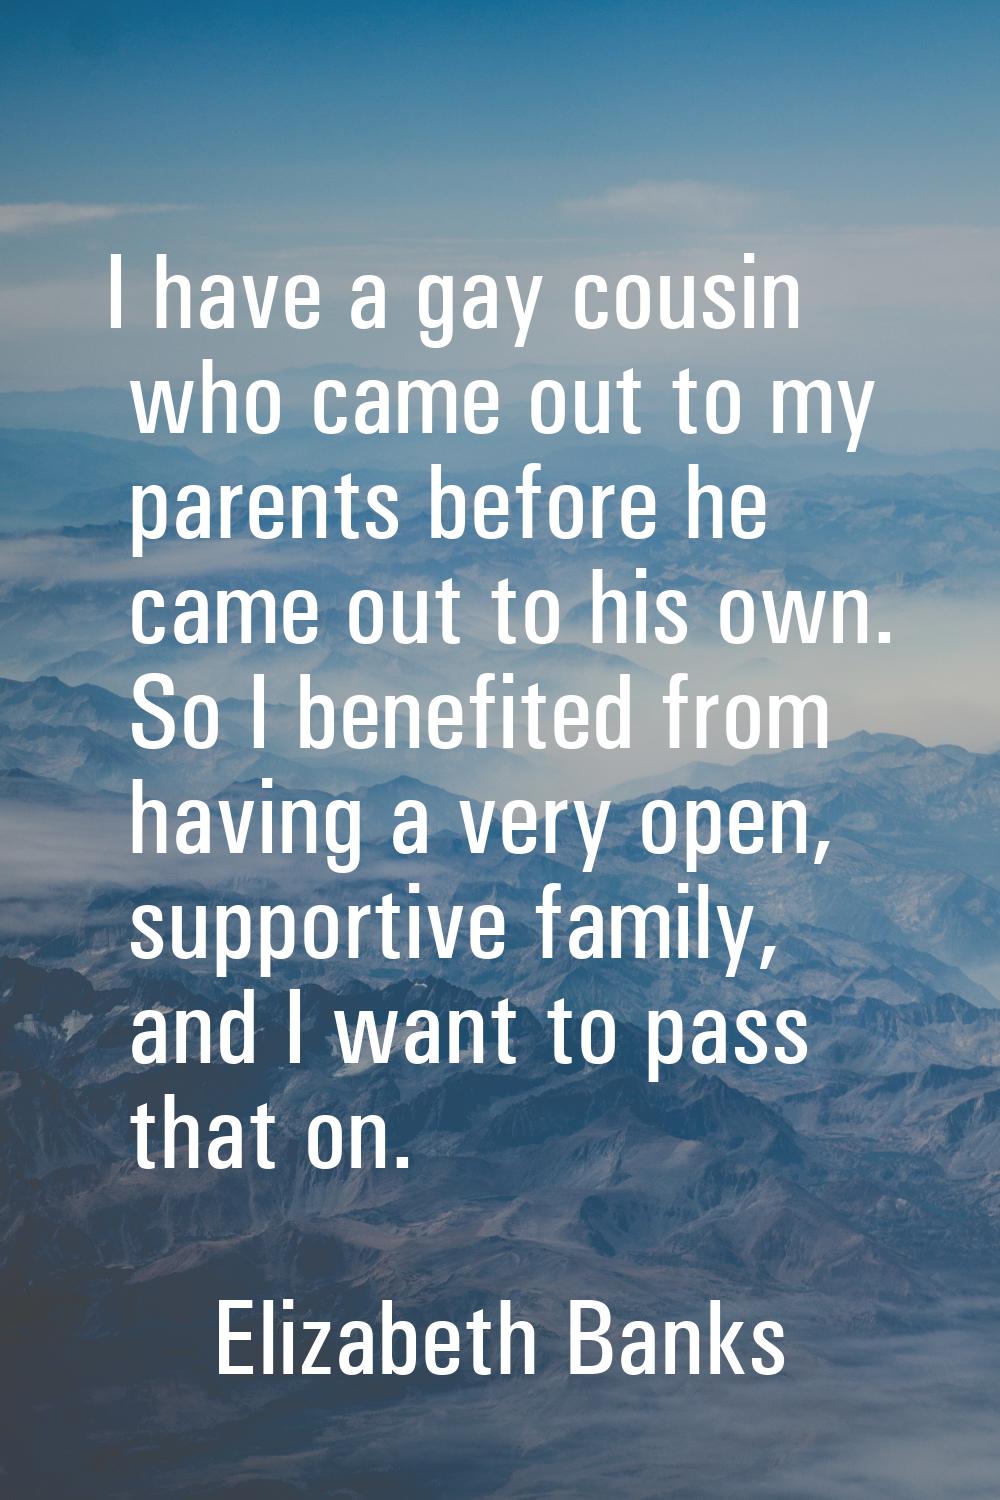 I have a gay cousin who came out to my parents before he came out to his own. So I benefited from h